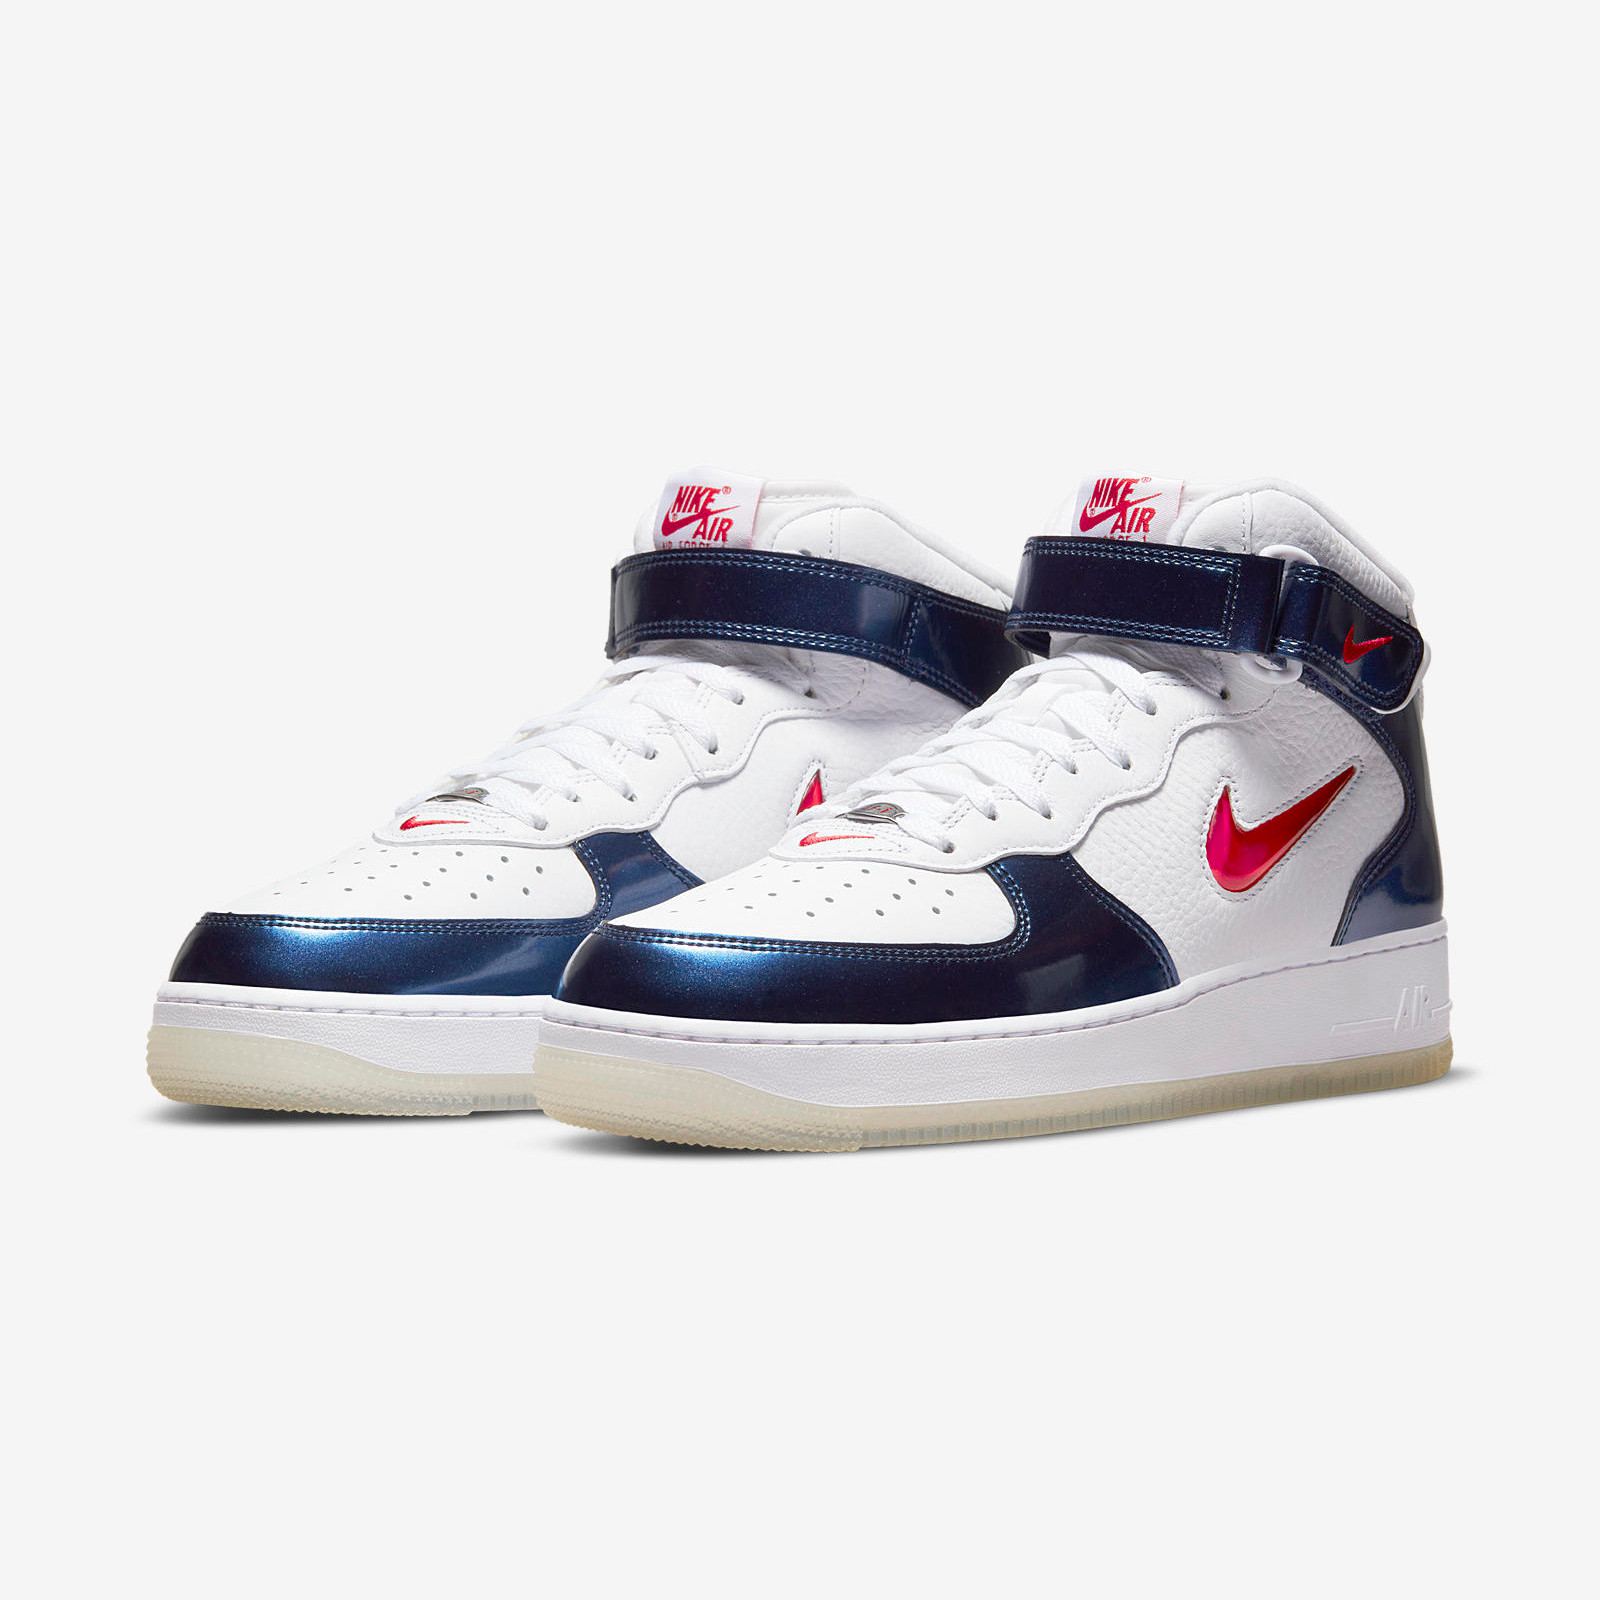 Nike Air Force 1 Mid
« Midnight Navy »